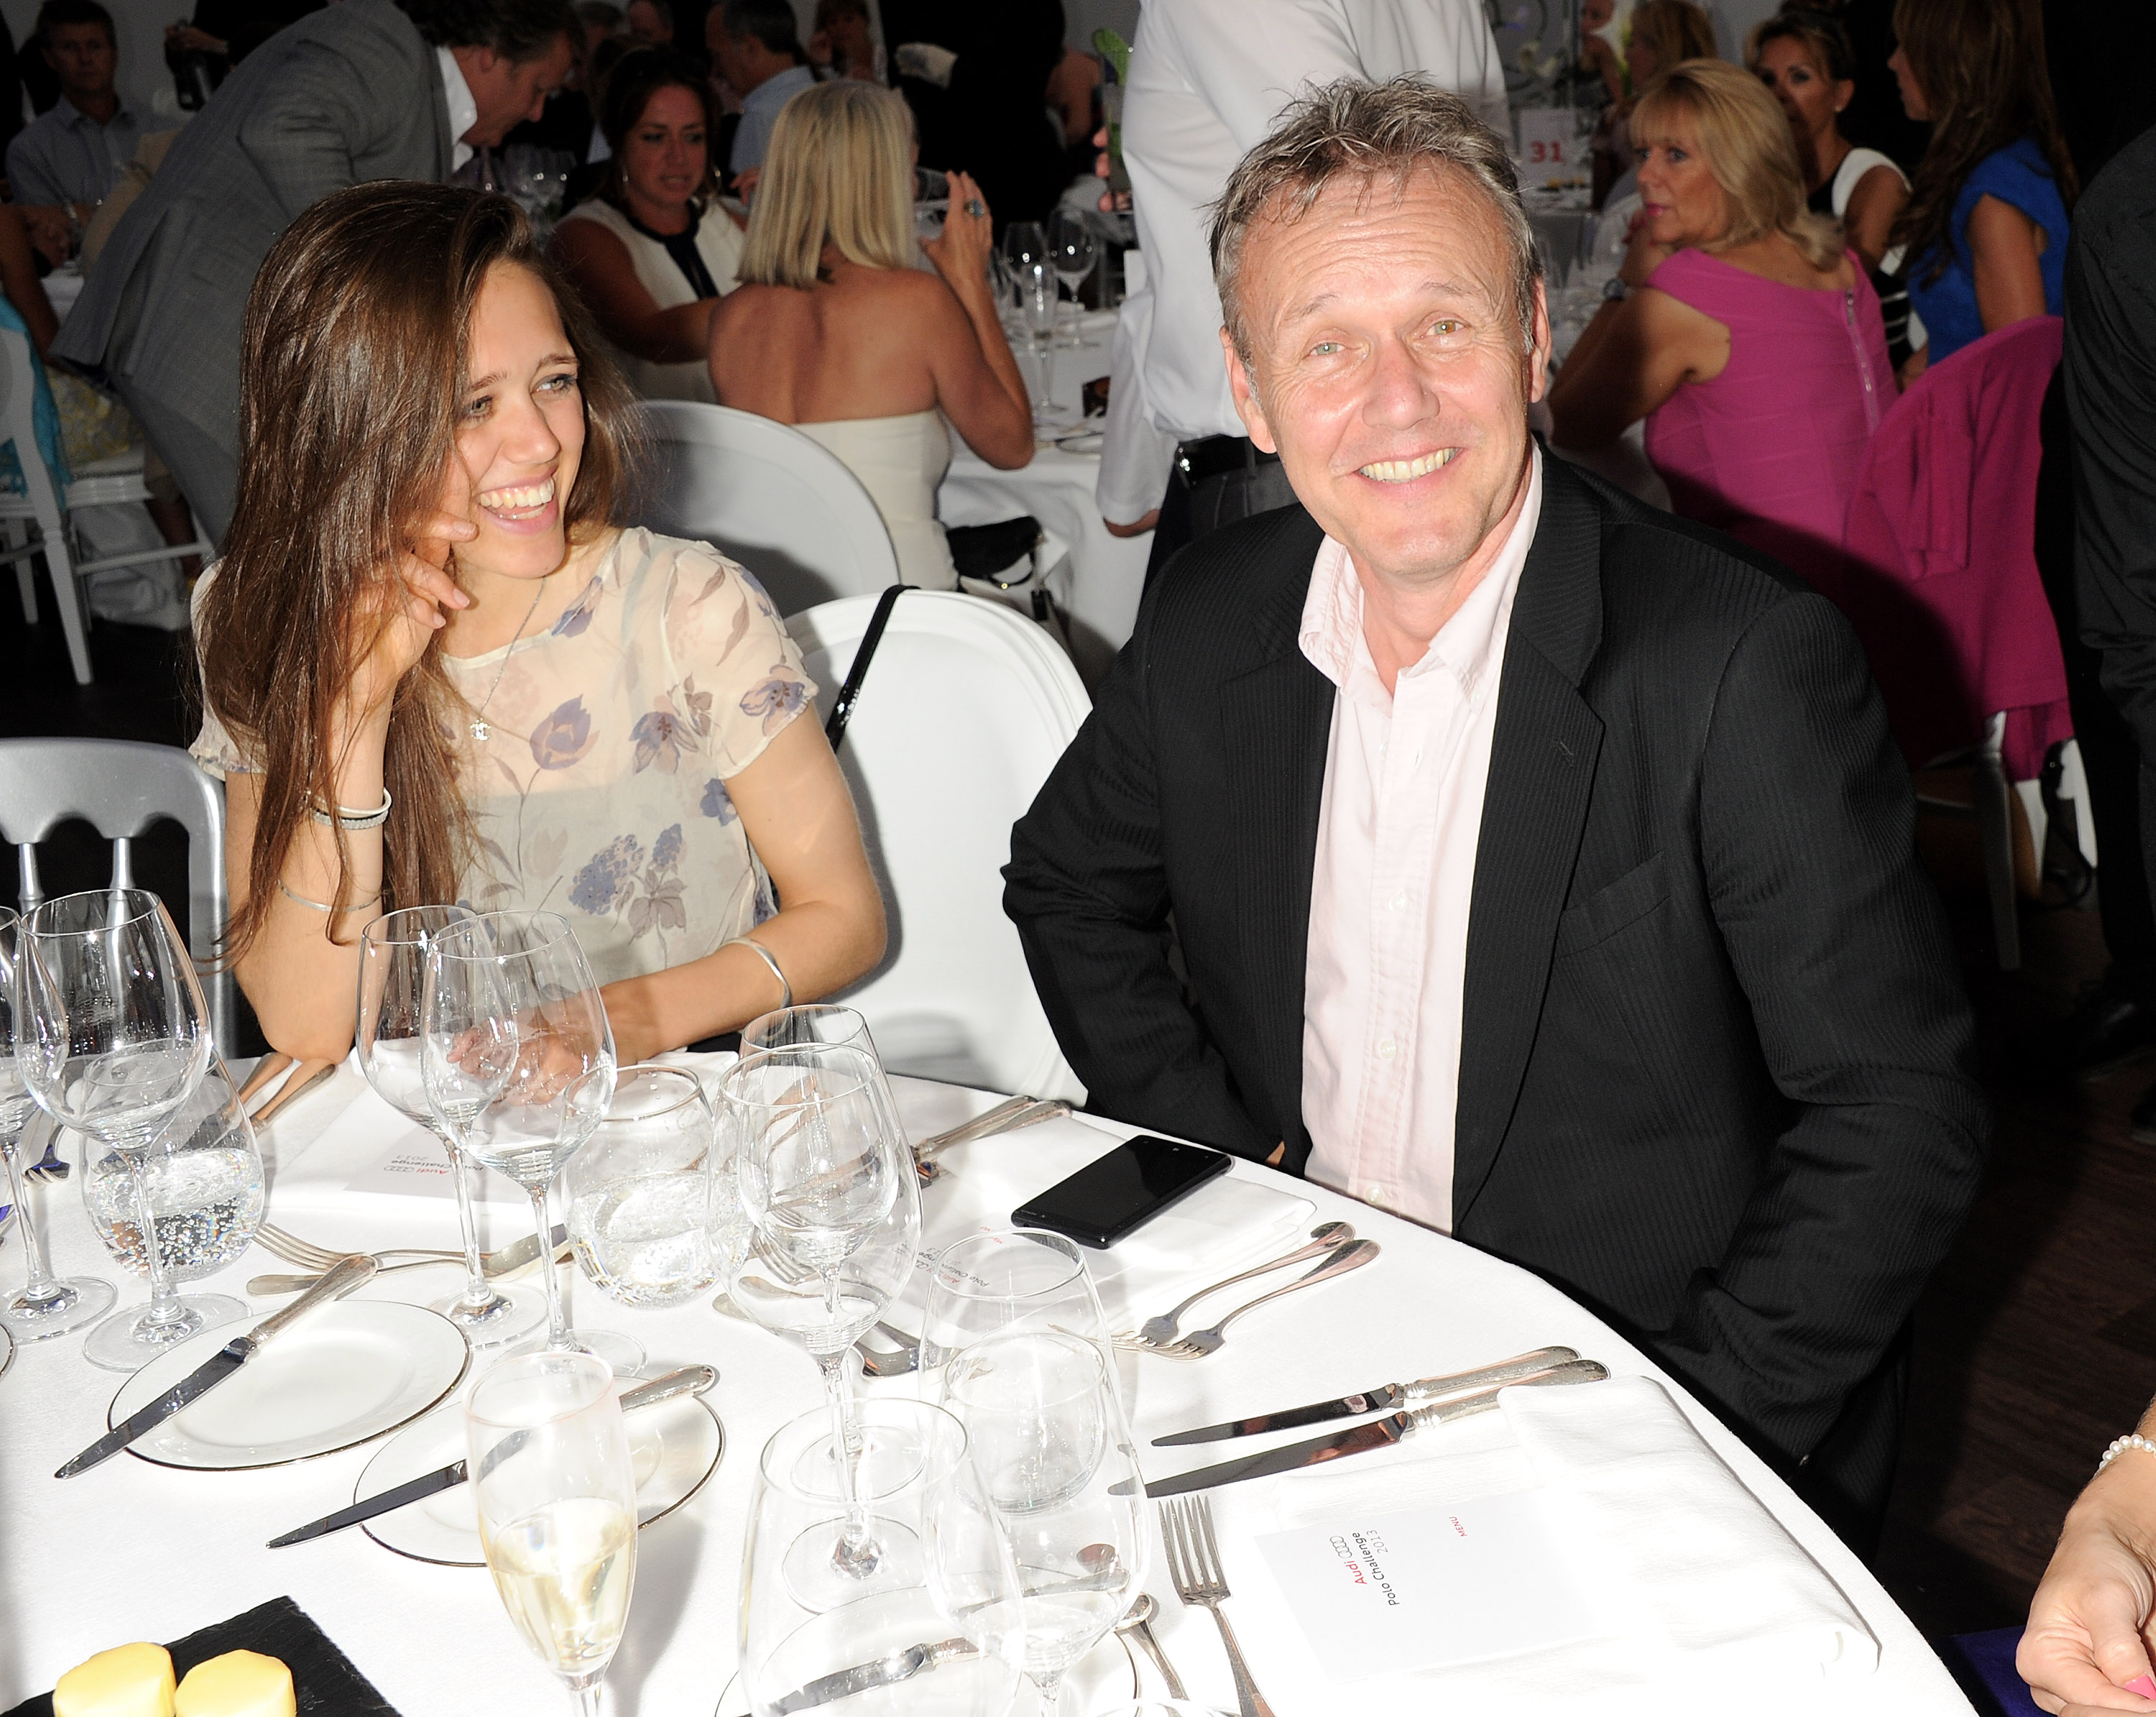 Daisy Head and Anthony Head at Coworth Park Polo Club on August 4, 2013, in Ascot, England. | Source: Getty Images